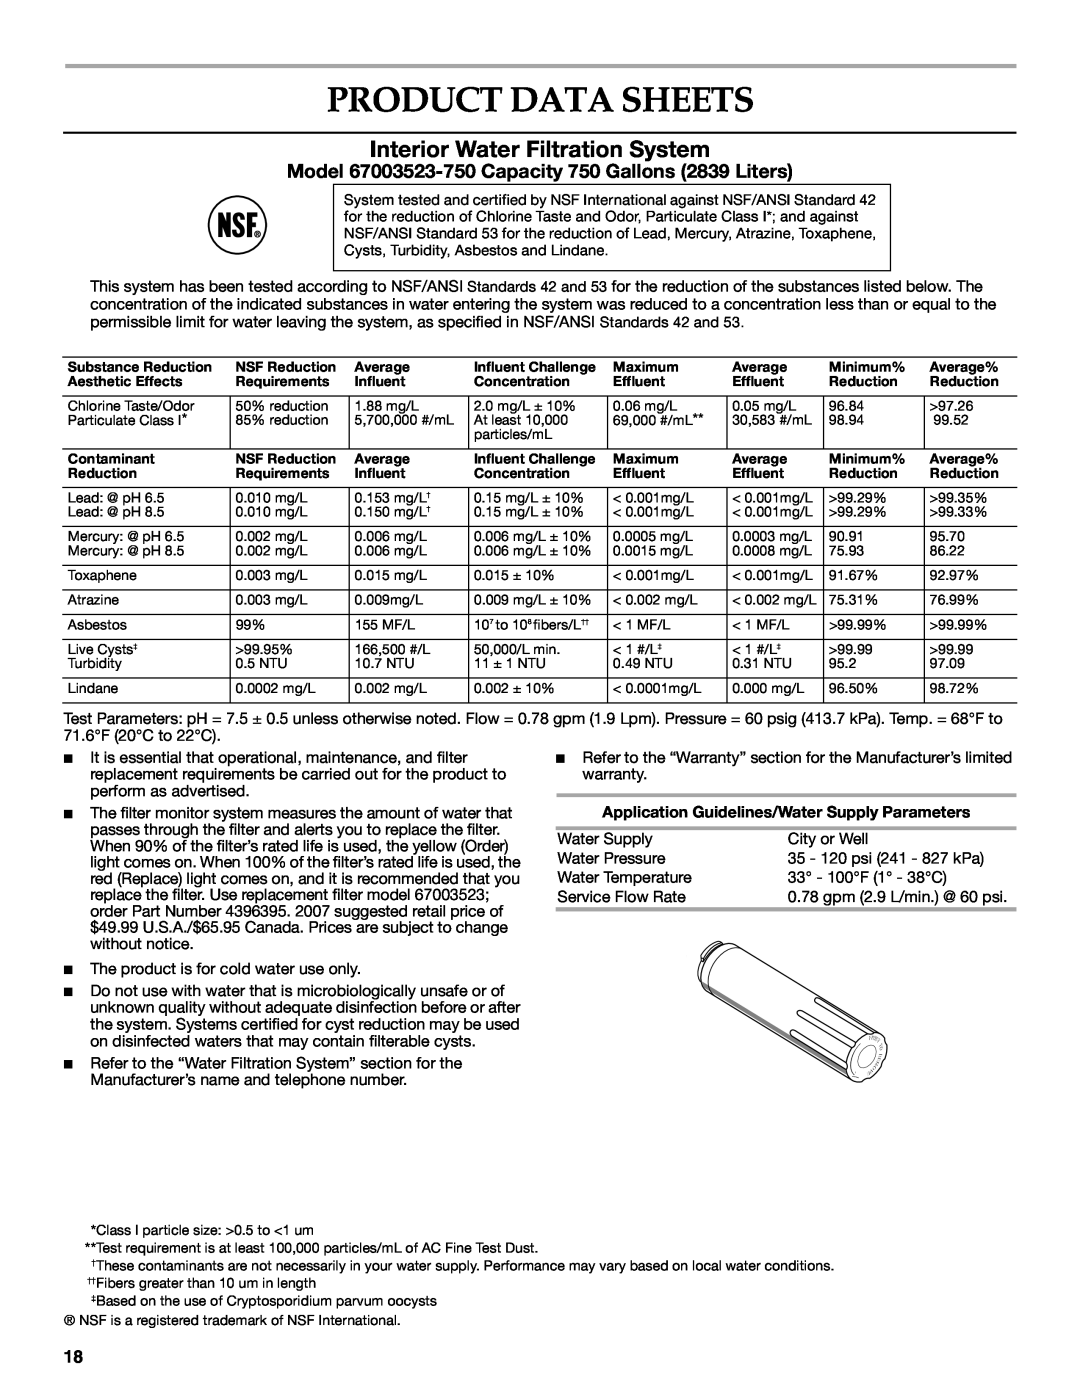 KitchenAid W10137649A installation instructions Product Data Sheets, Interior Water Filtration System 